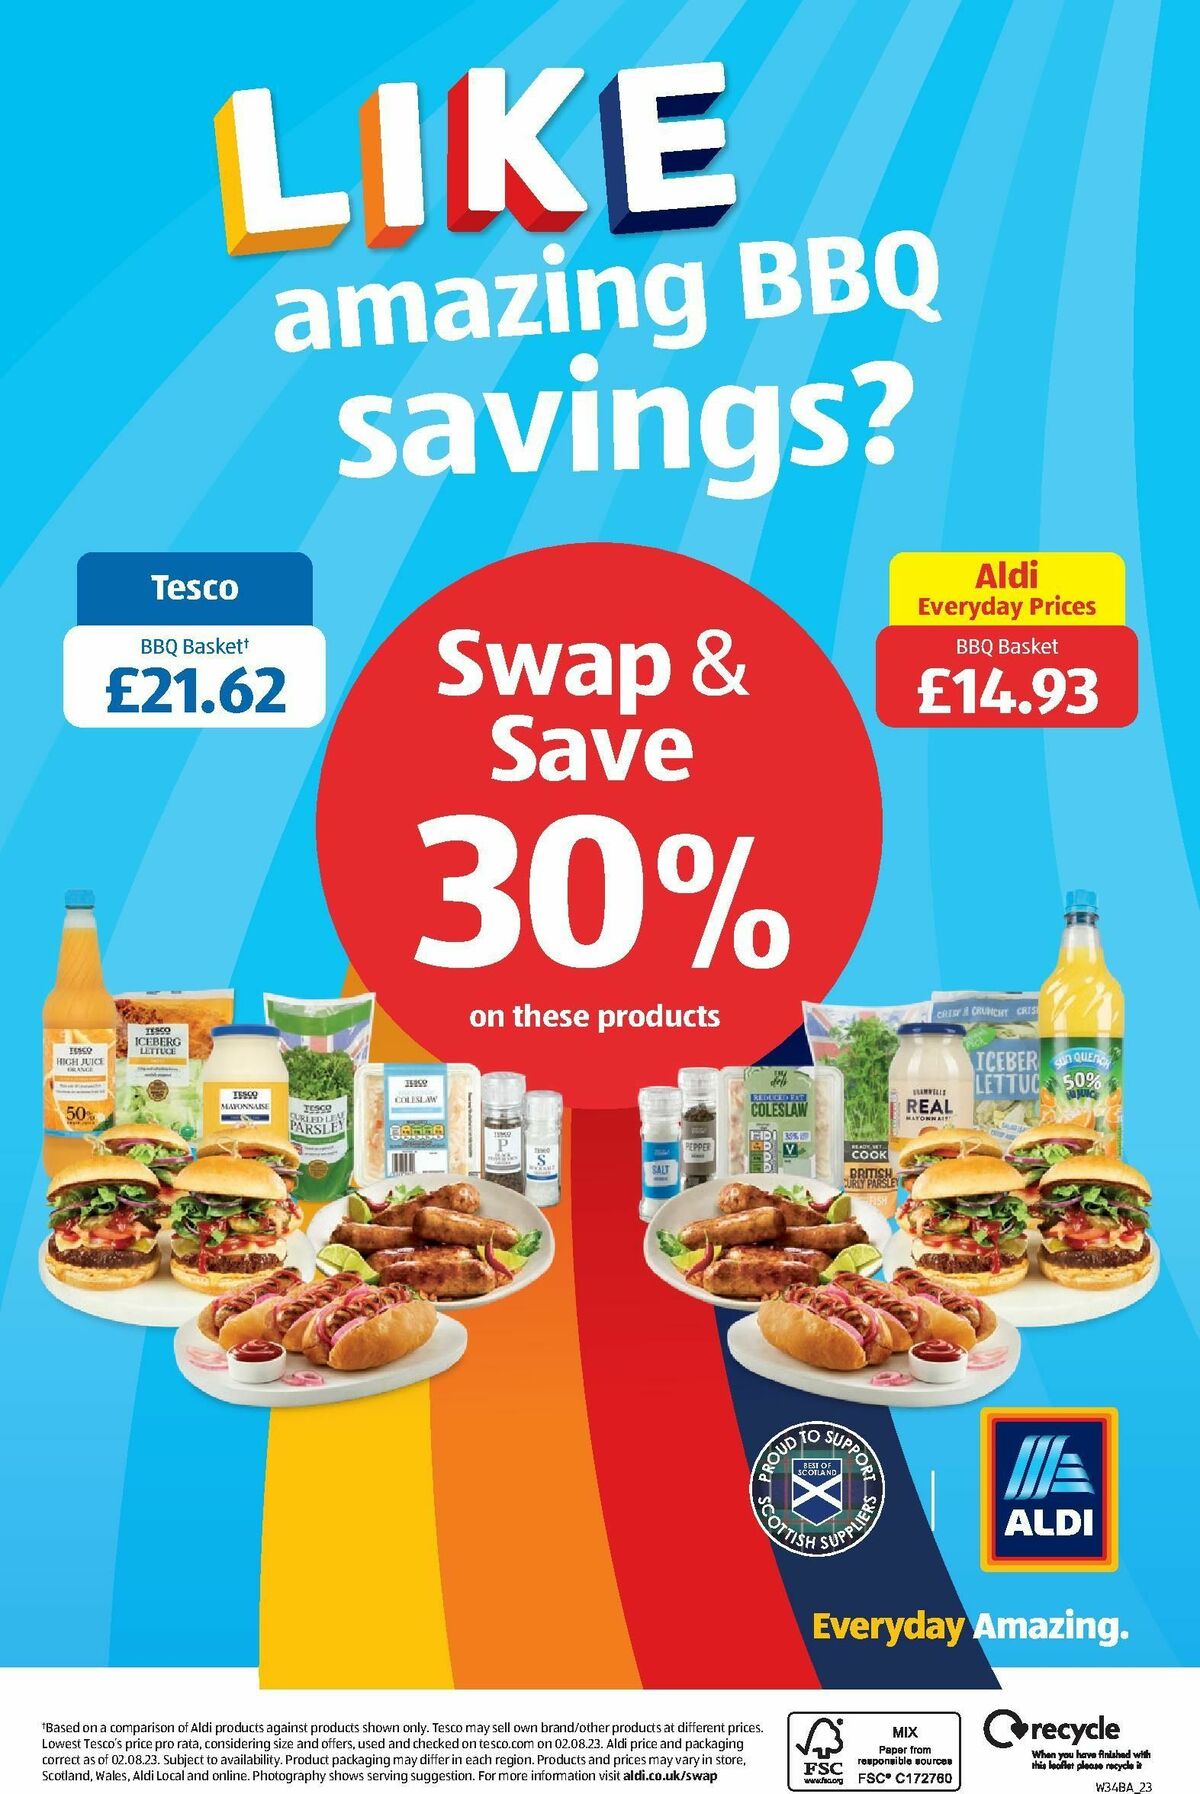 ALDI Scottish Offers from 21 August